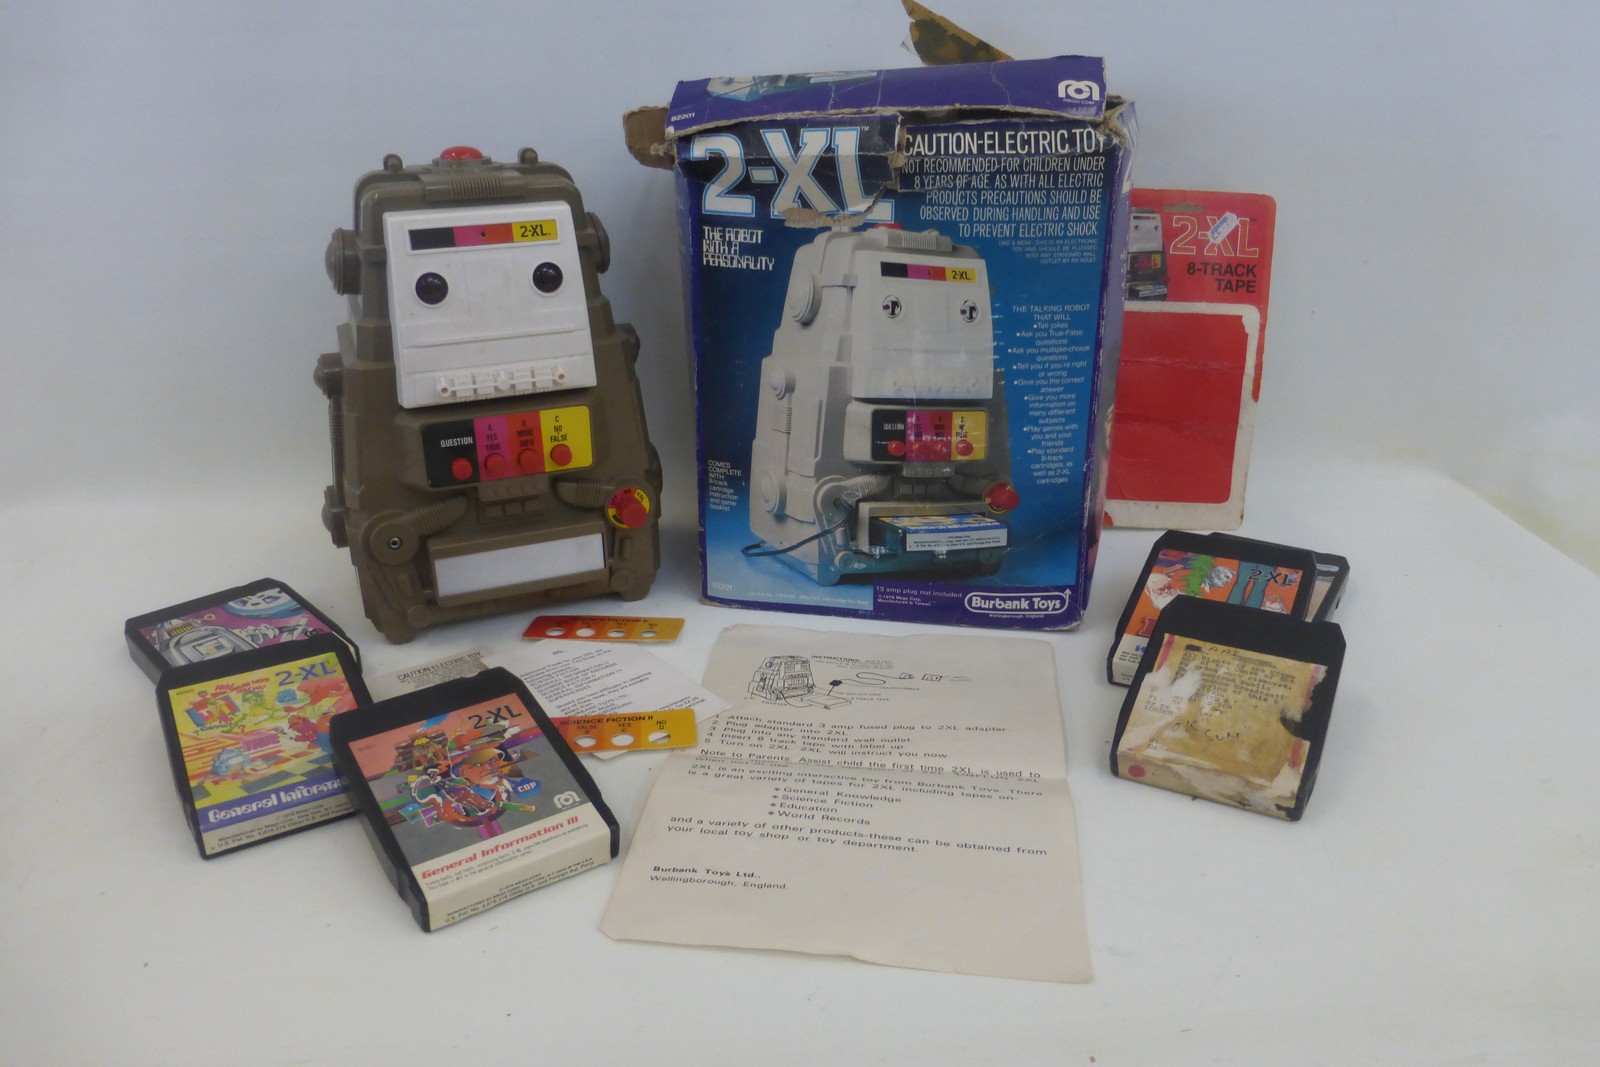 A boxed Burbank Toys 2-XL robot with cartridges.